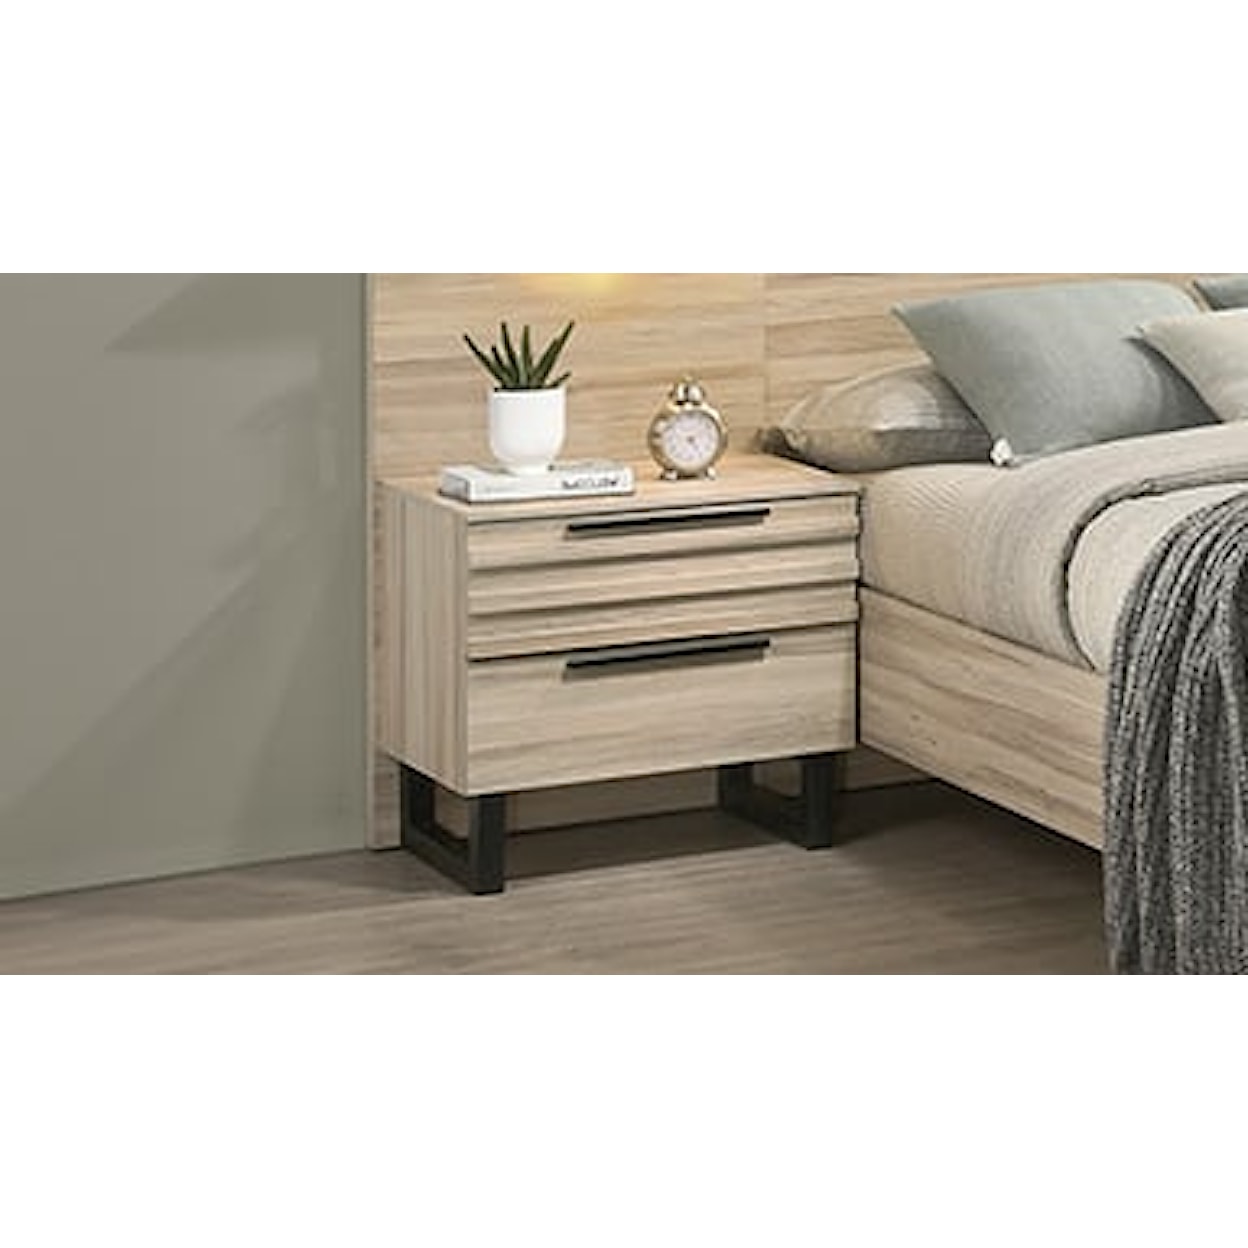 New Classic Novak 2-Drawer Nightstand with LED Bar